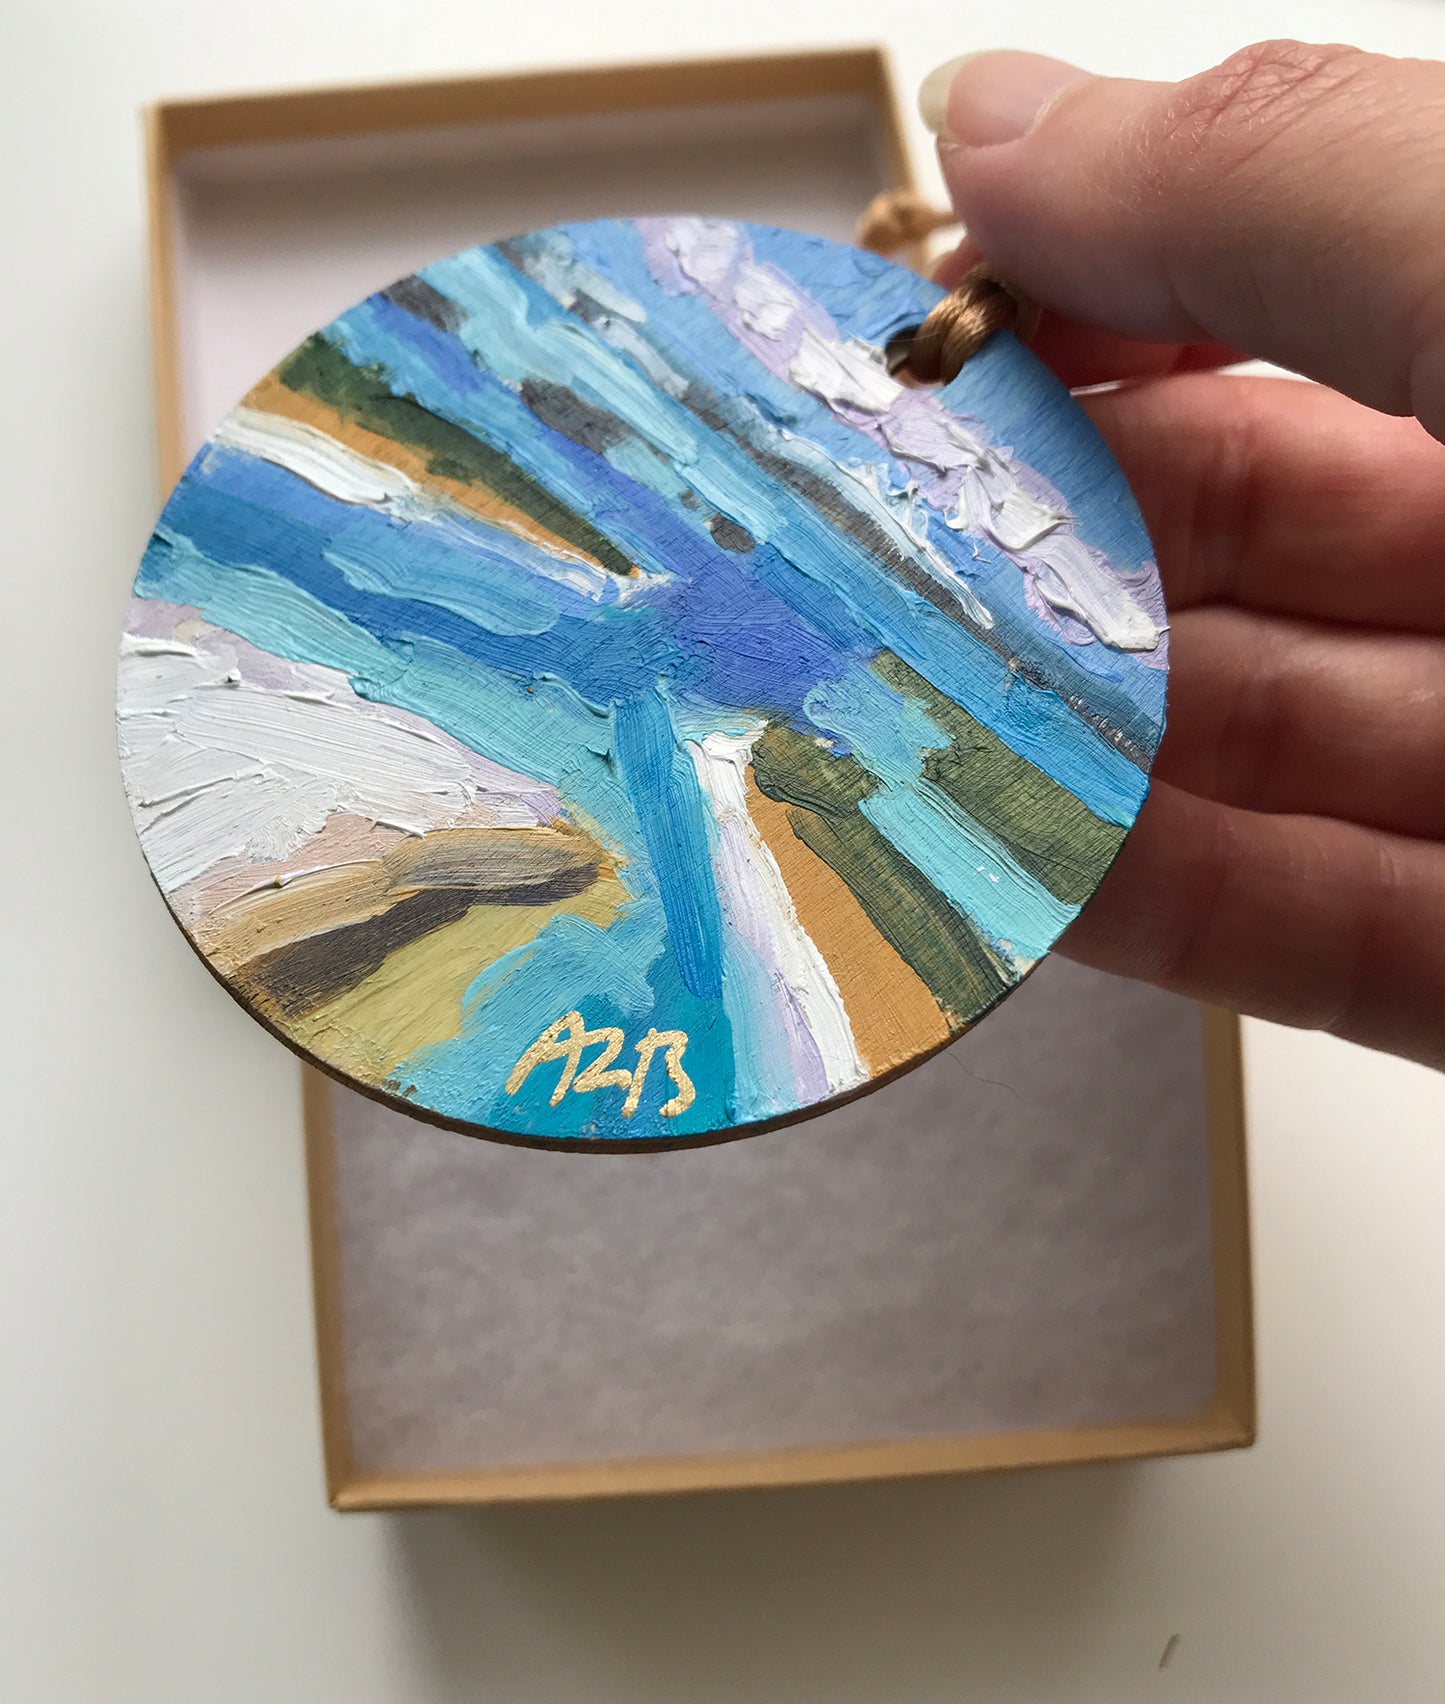 2022 Bunces Pass, Tampa Bay and Skyway Bridge Hand Painted Ornament